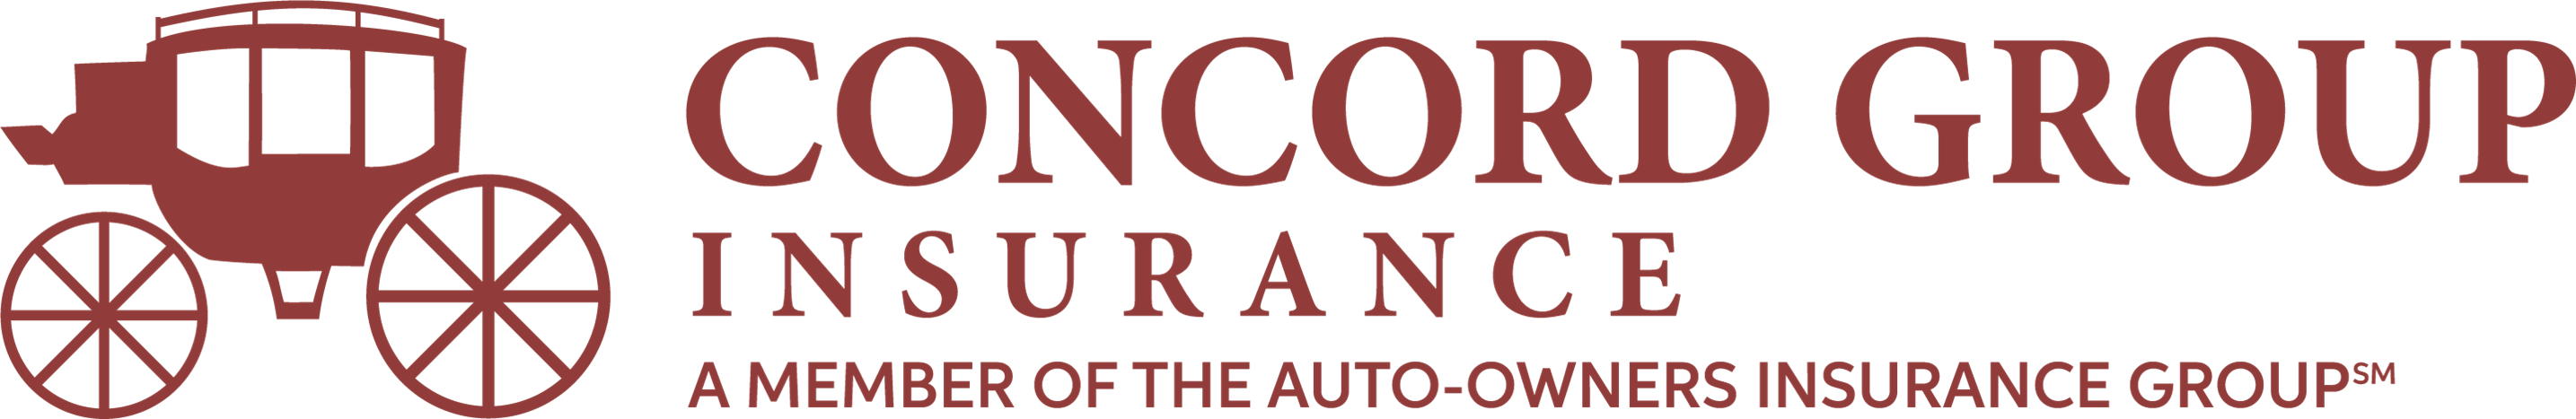 Concord Group Ins - New logo red.png